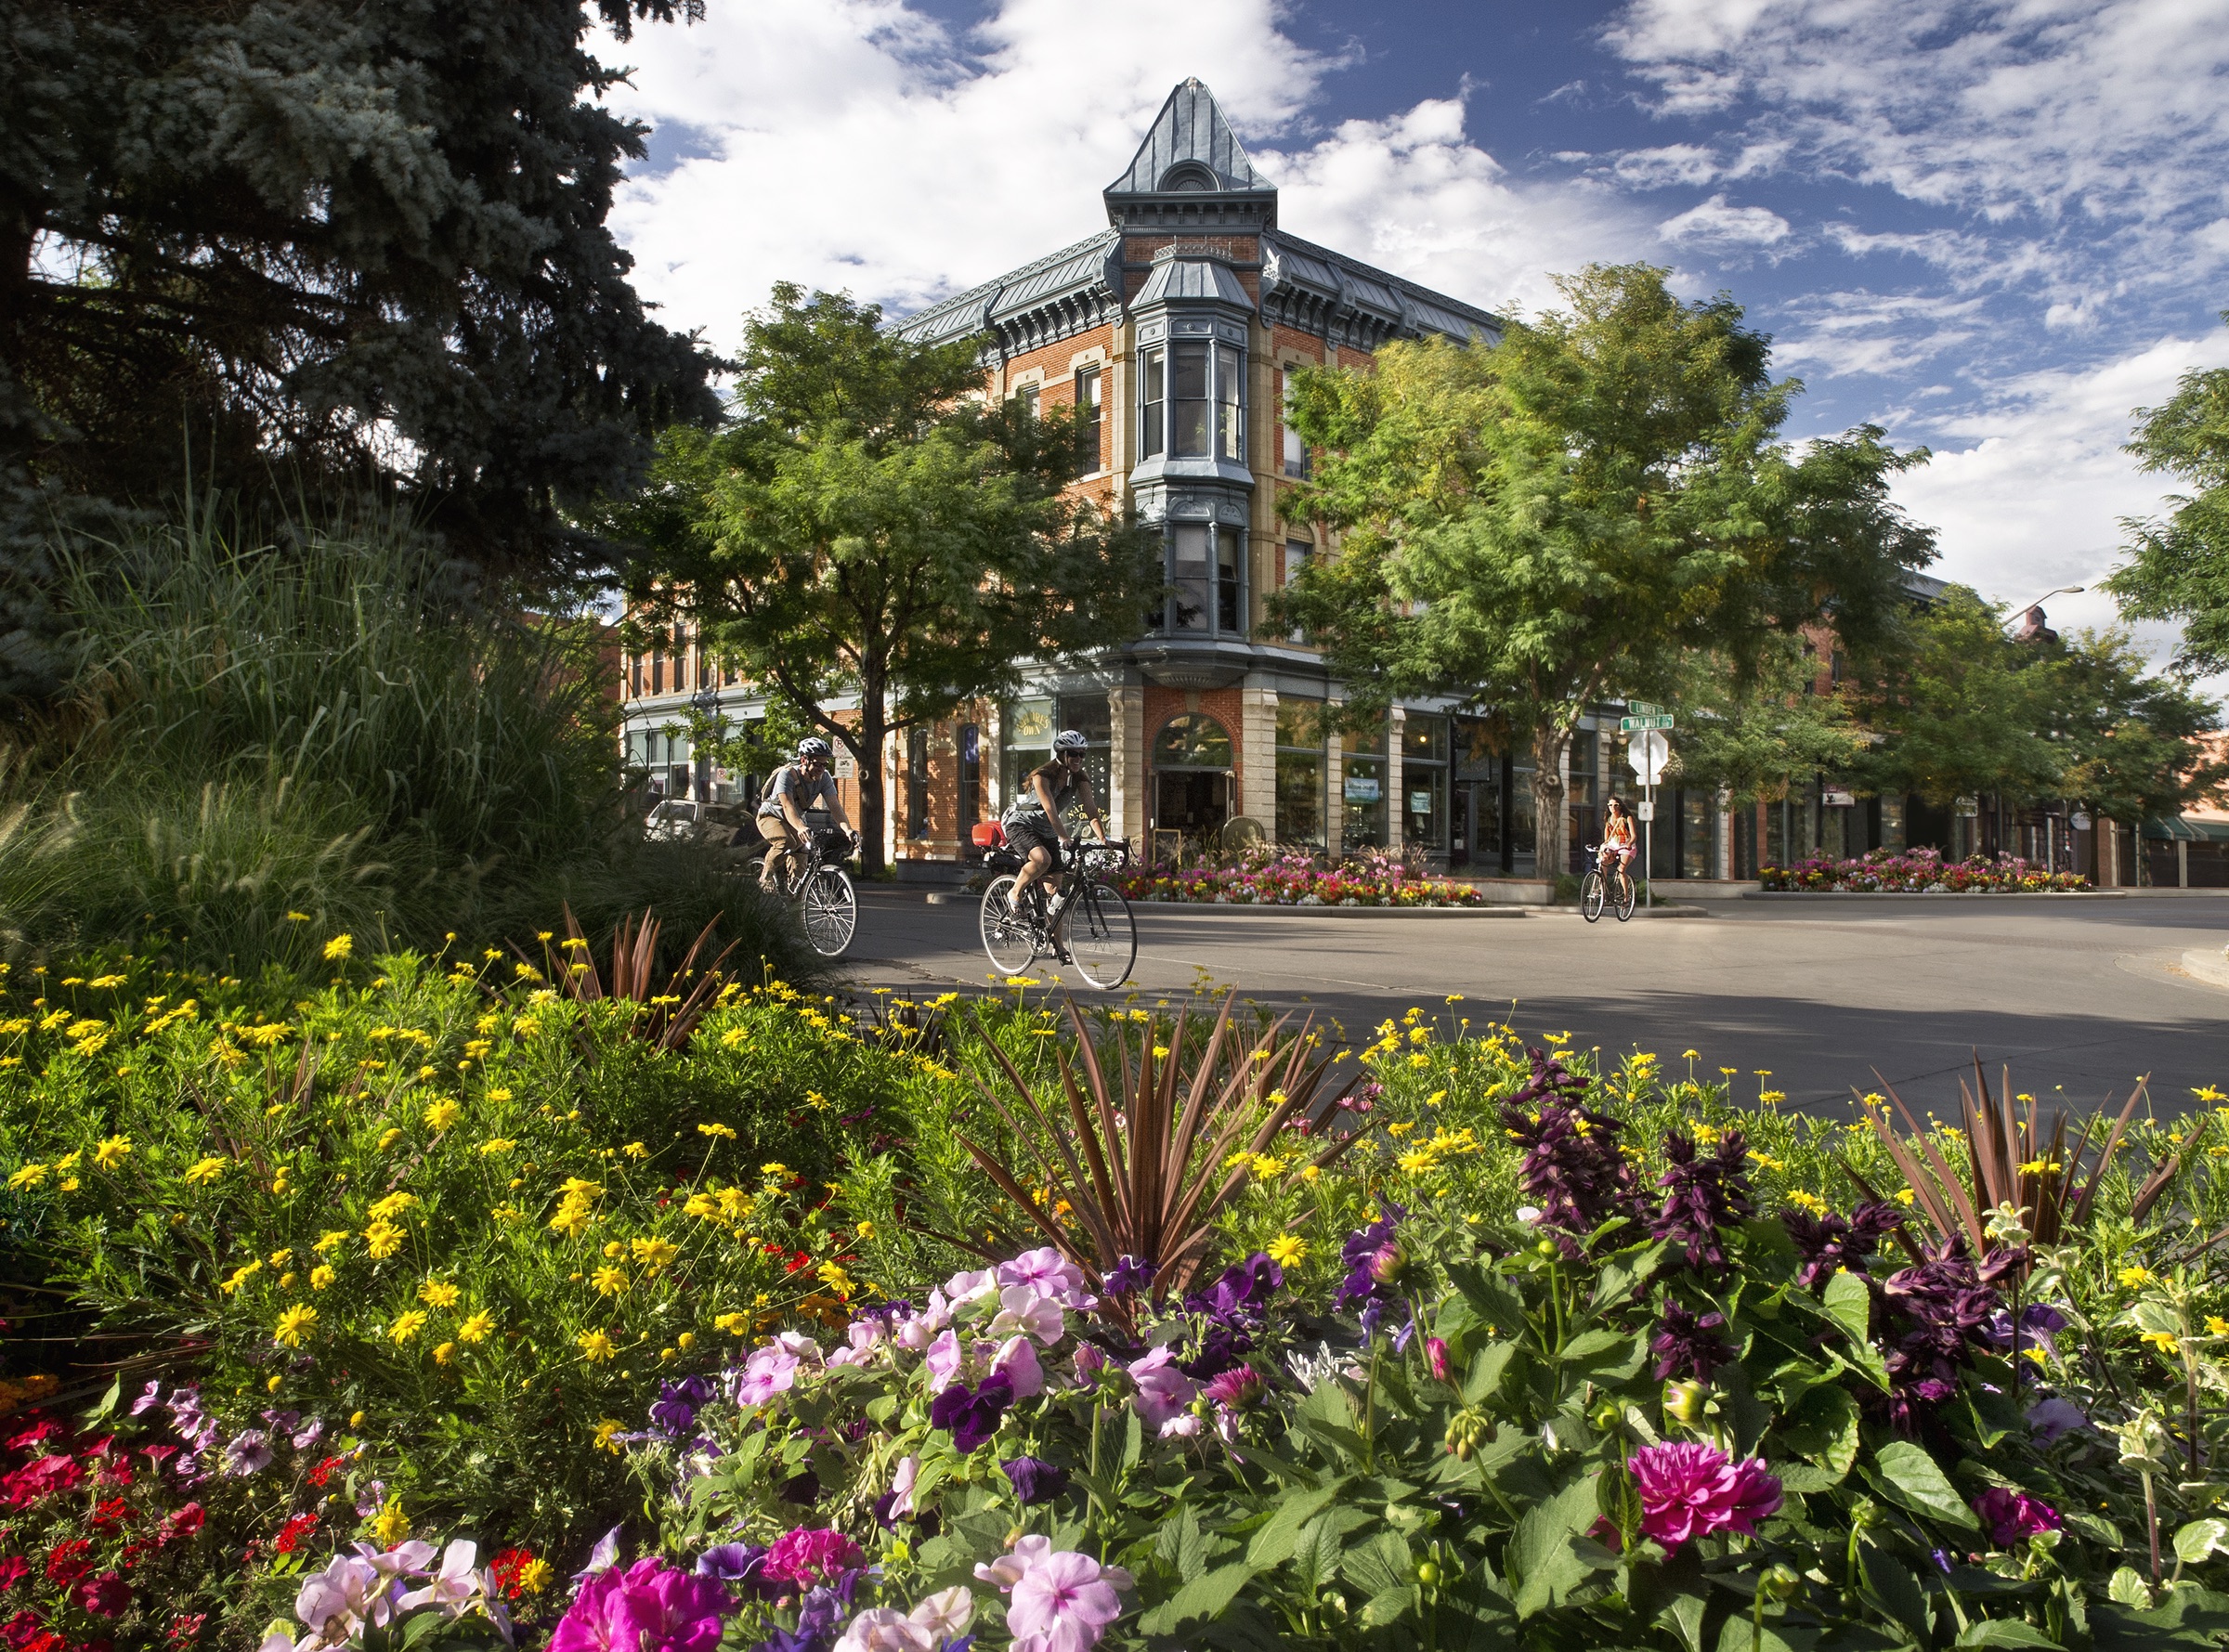 Explore beautiful Old Town Fort Collins